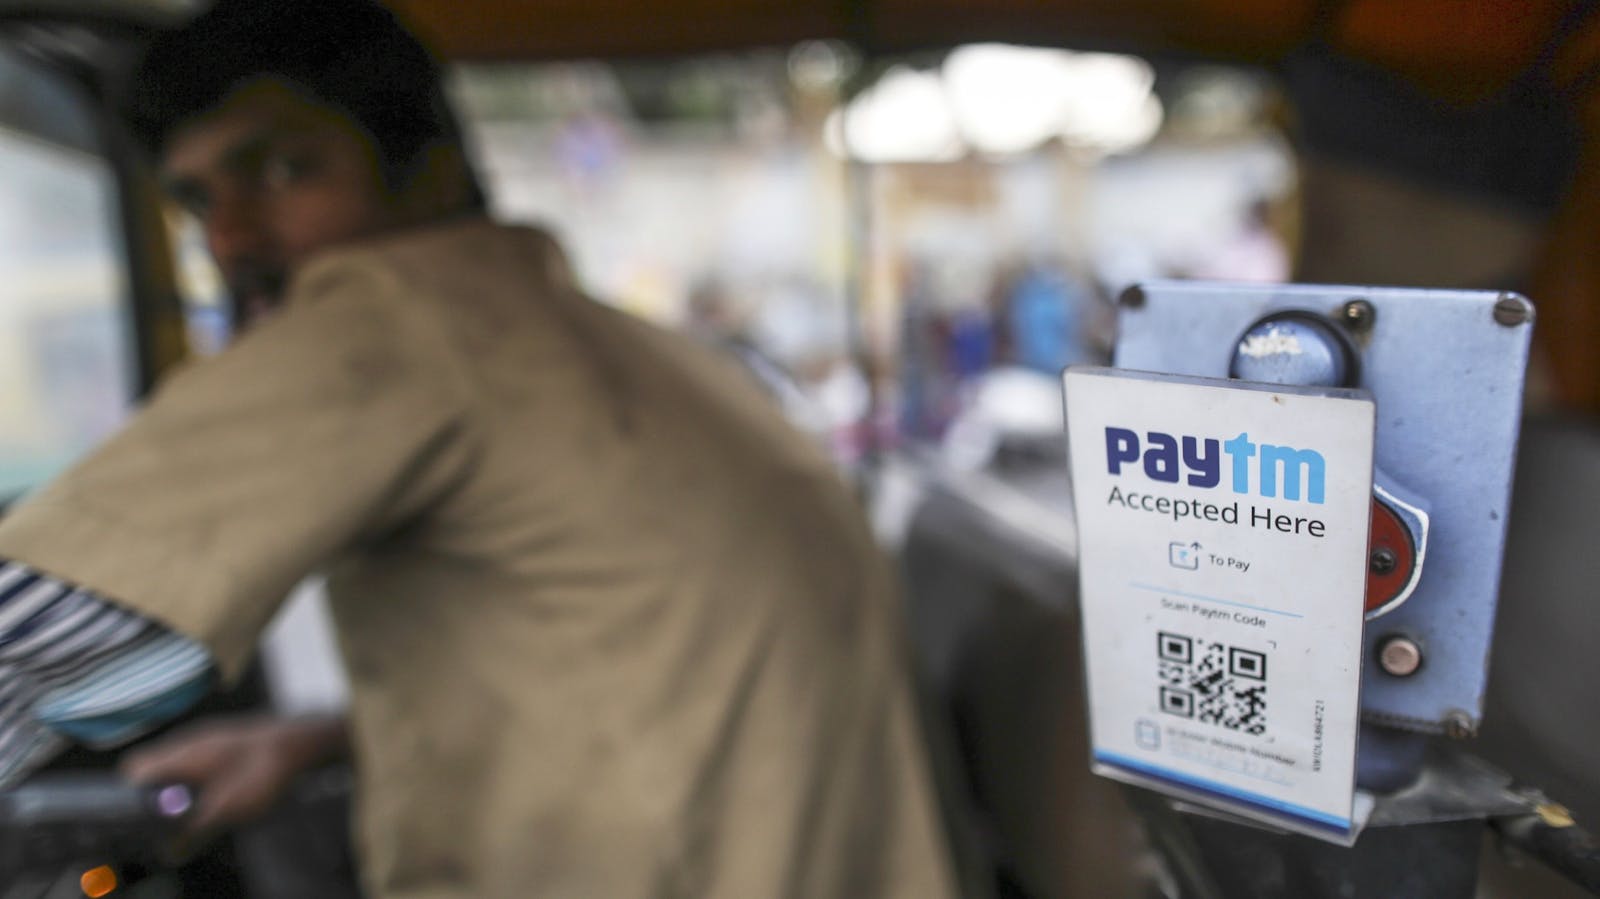 A driver in Bengaluru, India, who accepts Paytm. Photo by Bloomberg.